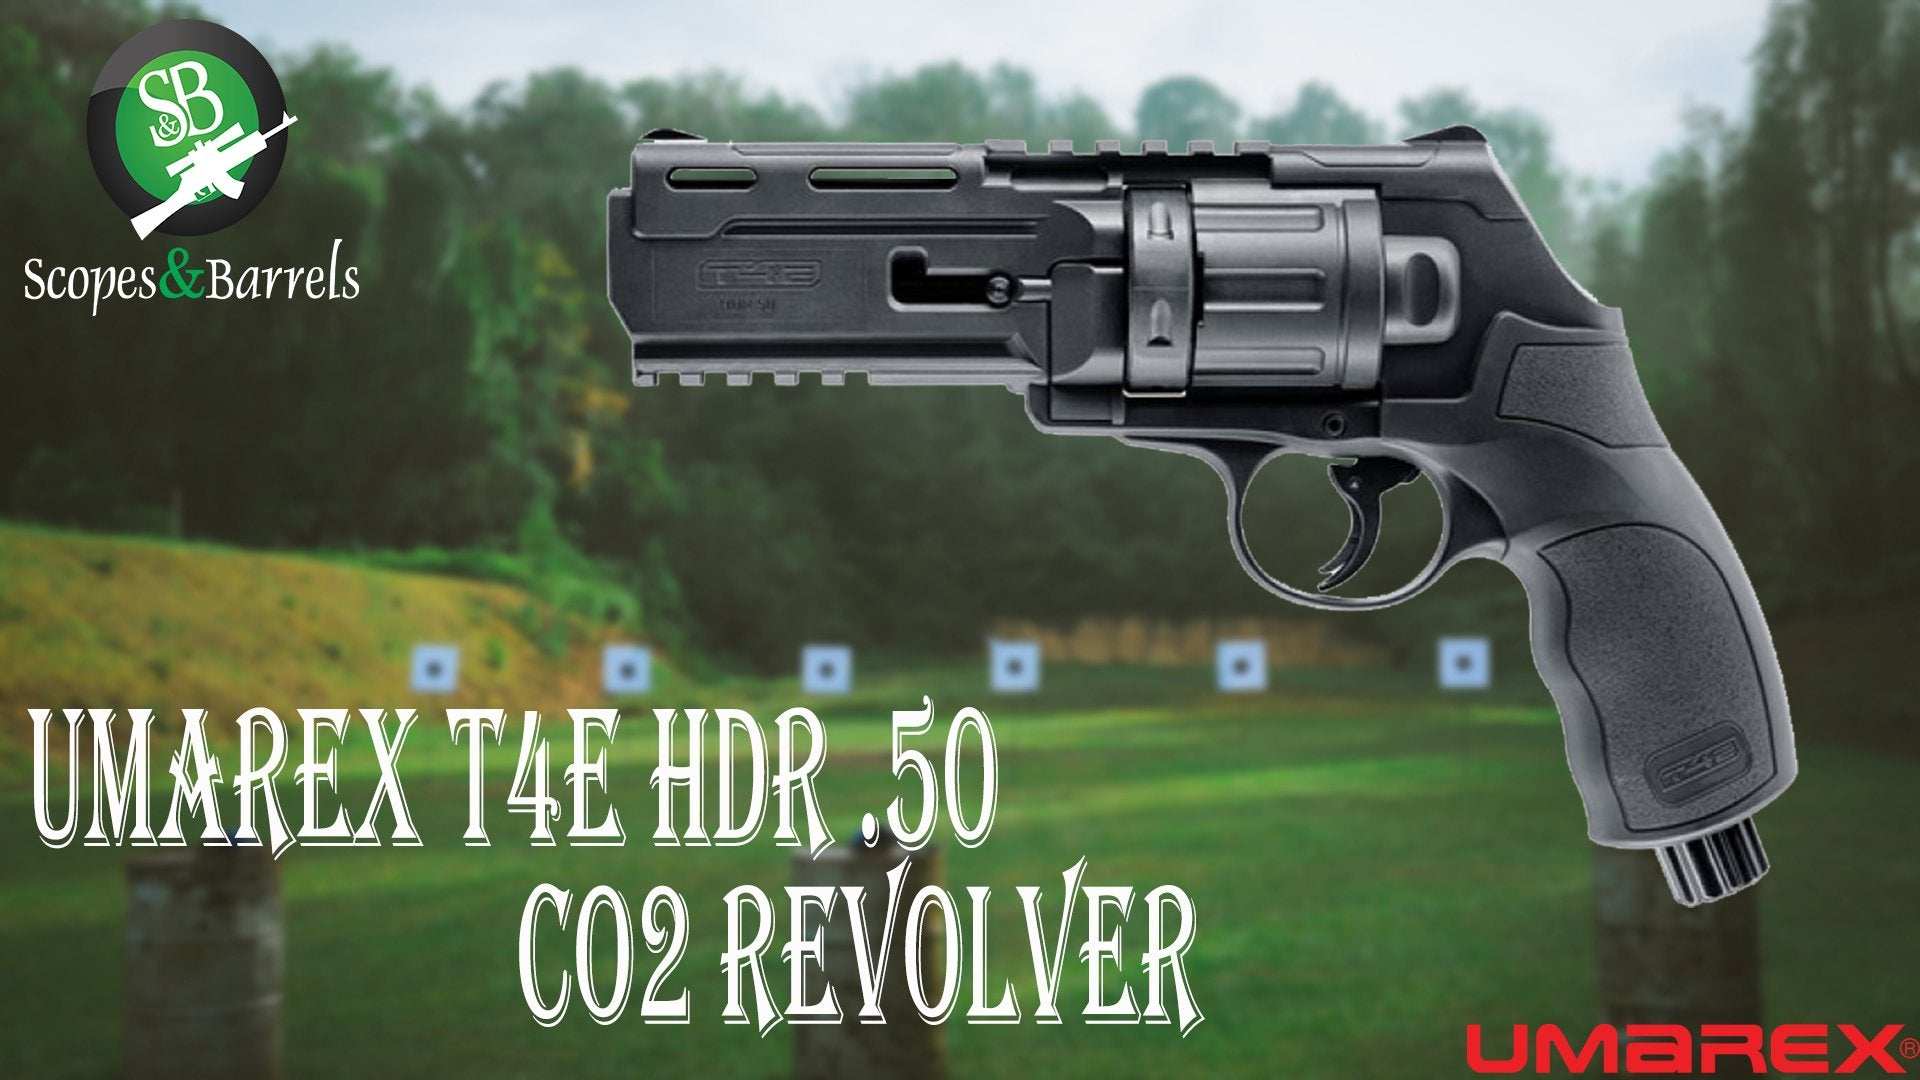 Blog: Umarex T4E HDR .50 Co2 Revolver. The HDR 50 is a revolver with visible strengths. - Scopes and Barrels